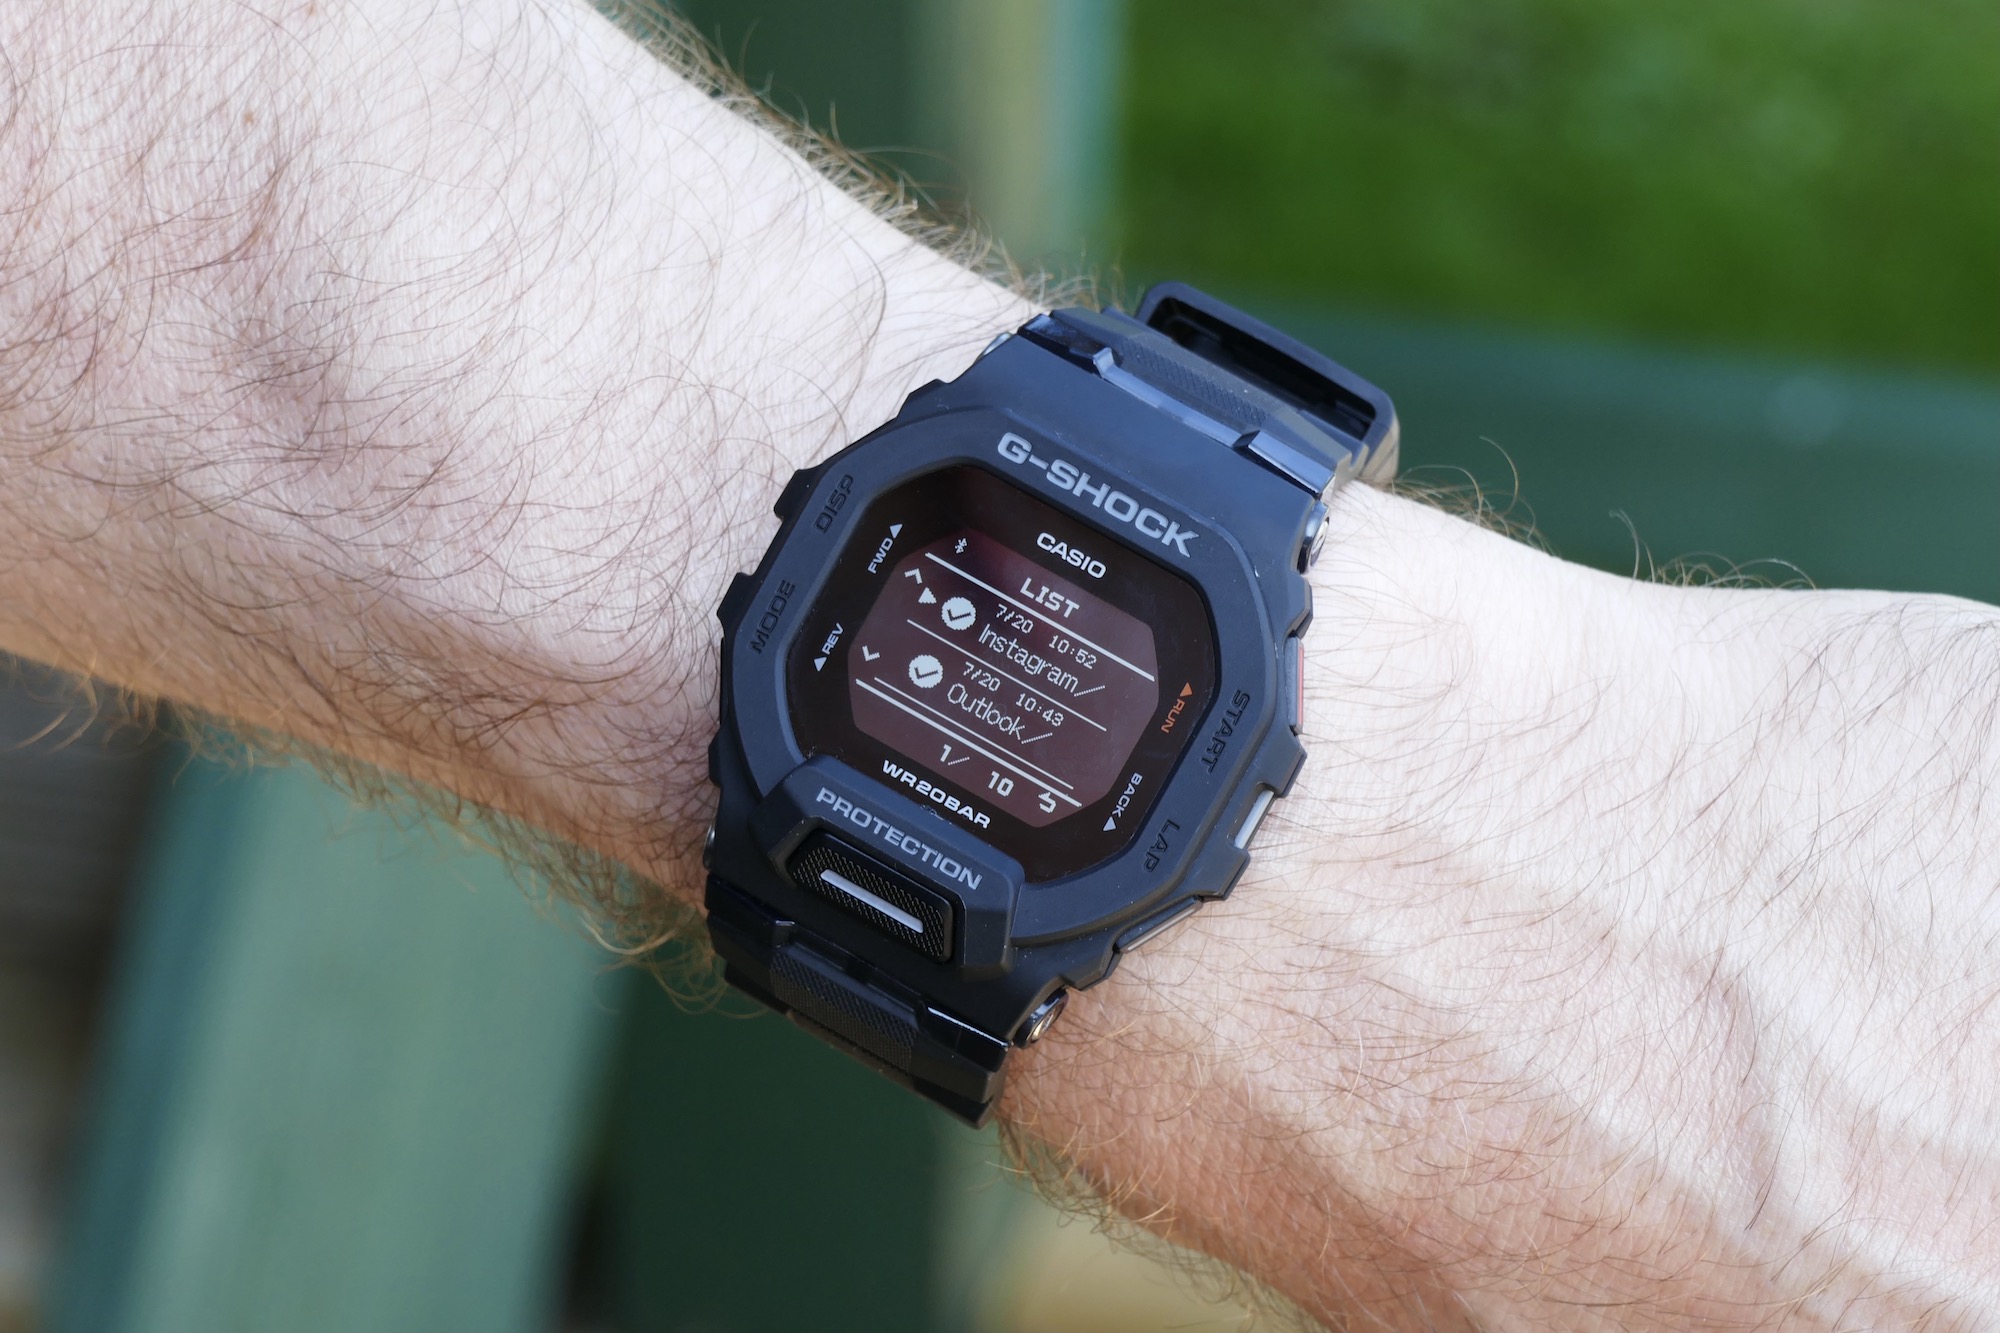 Activity screen on the Casio G-Shock GBD-200.